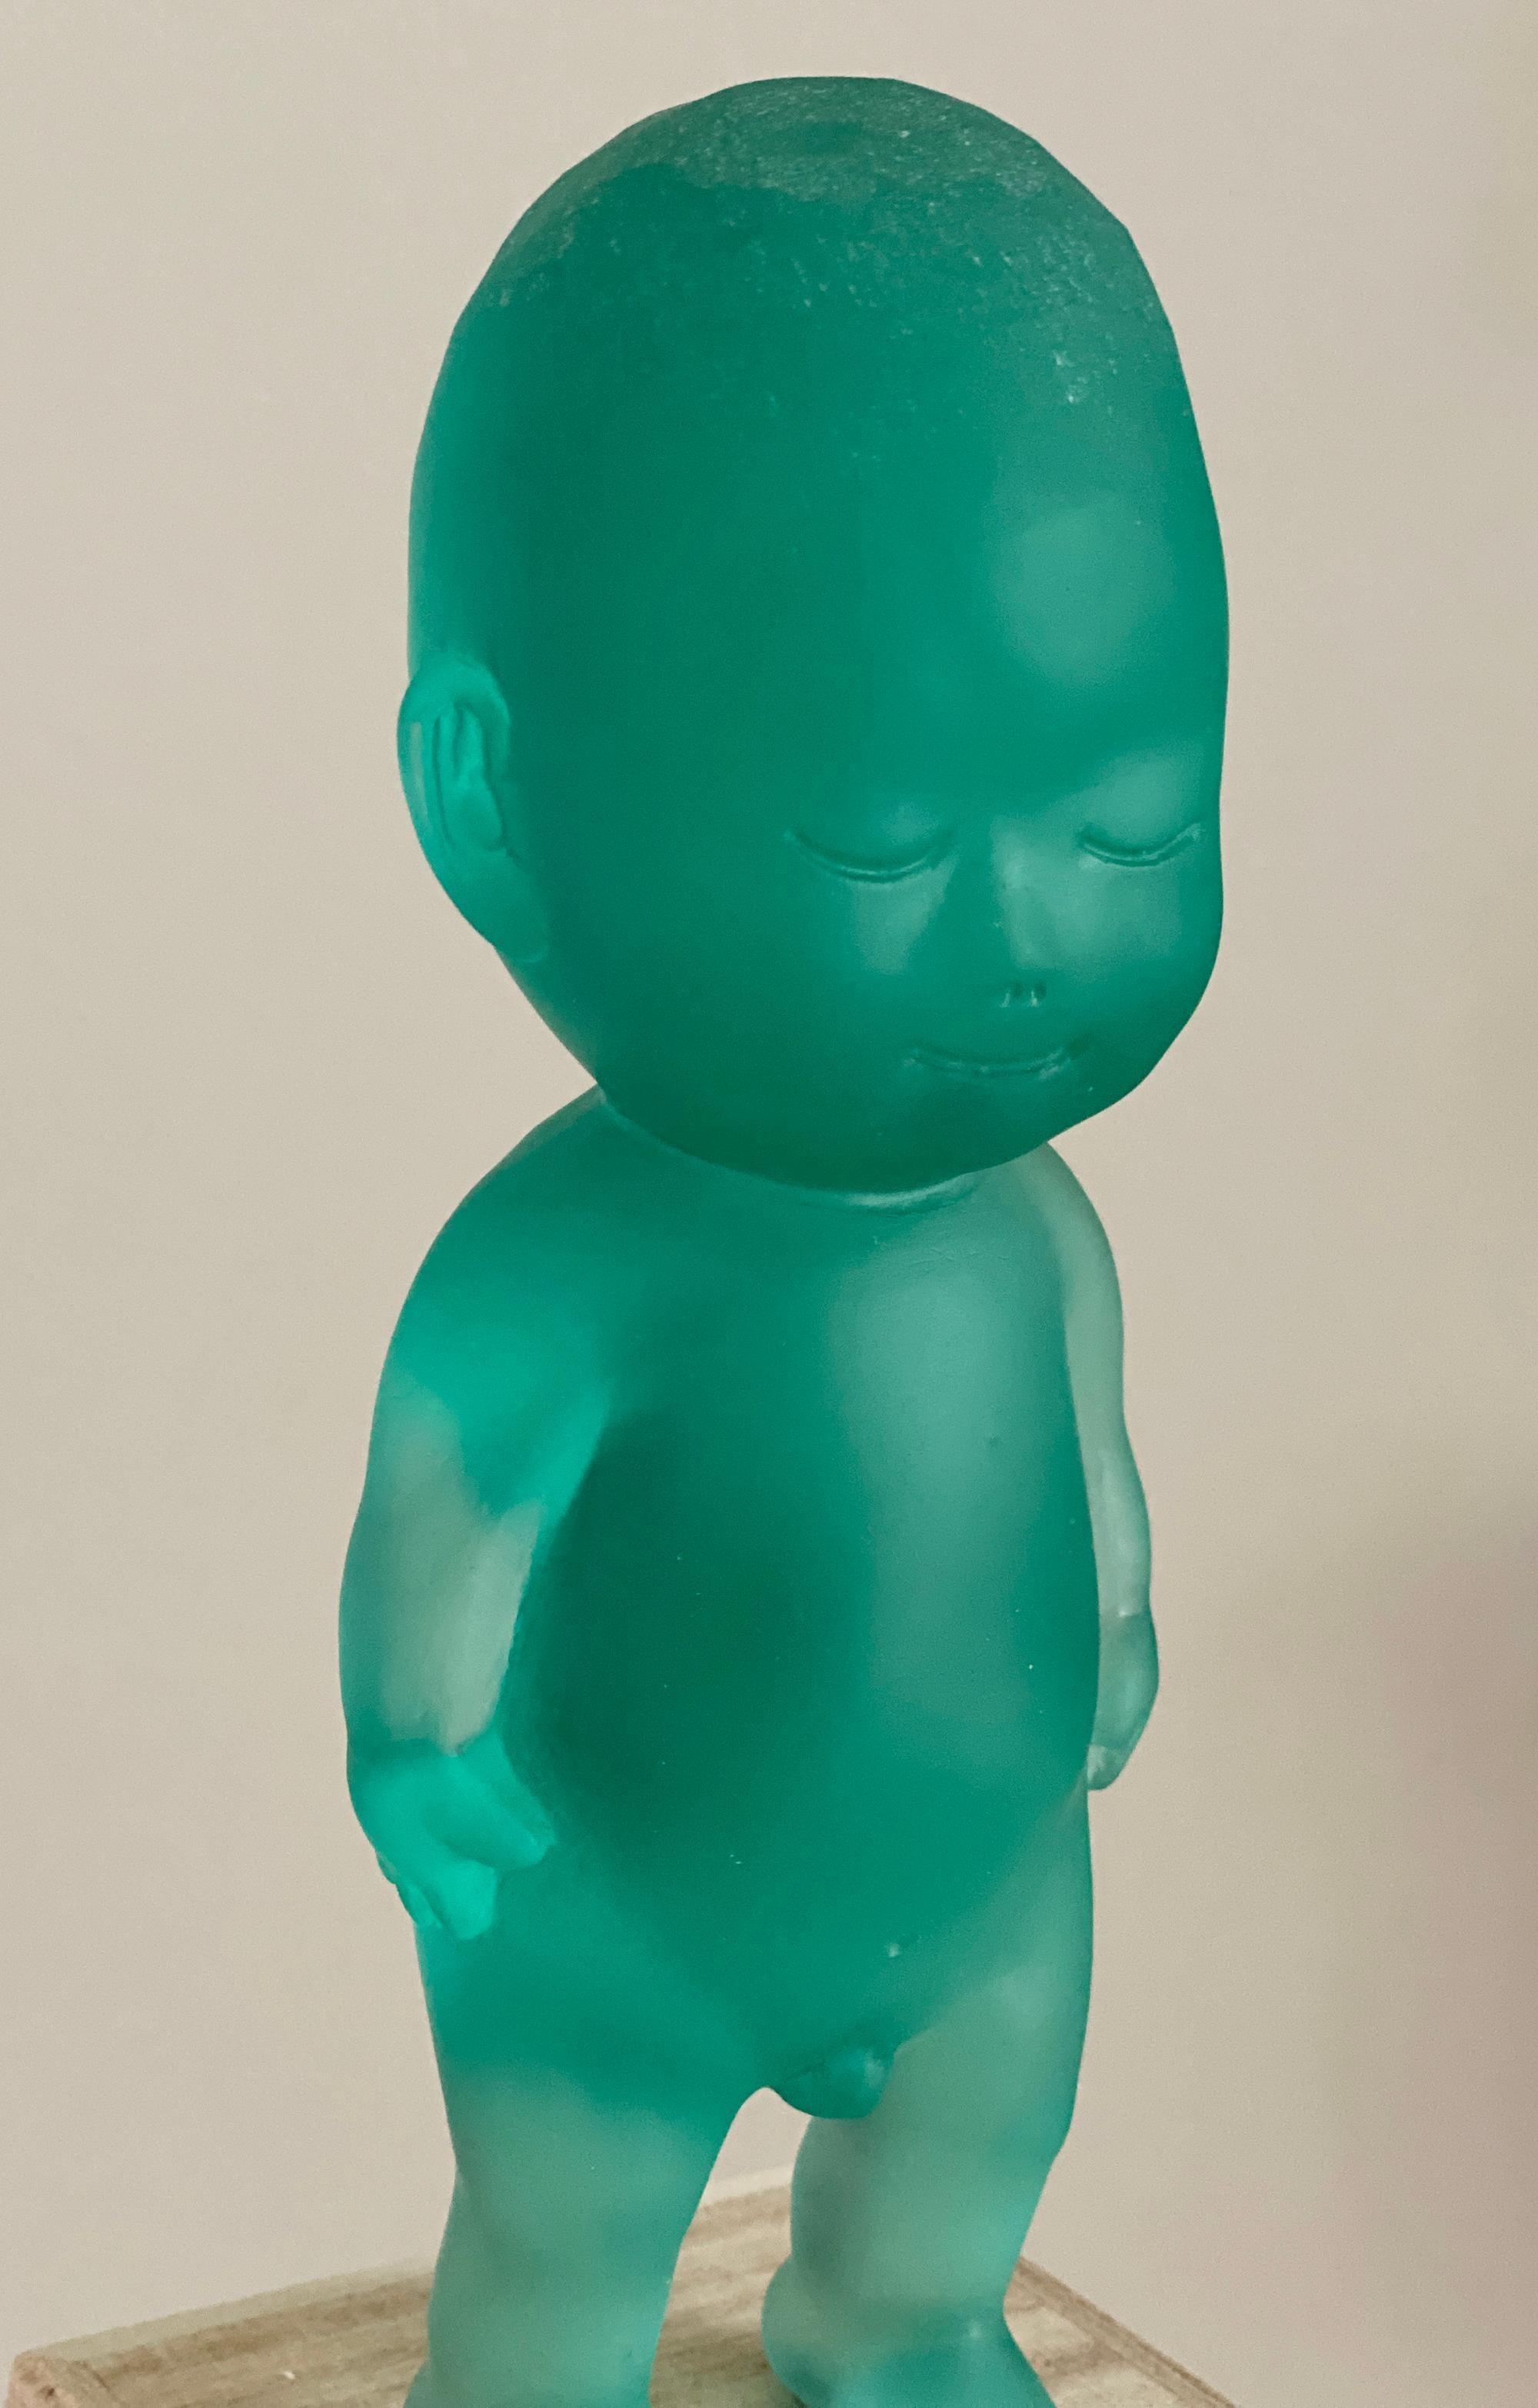 “The glass baby, filled with light, sits before us like a god. It is the Existence as a prayer for the future.” -Koichi Matsufuji

Matsufuji has long been interested in the materiality of glass. He began to create babies which symbolize the